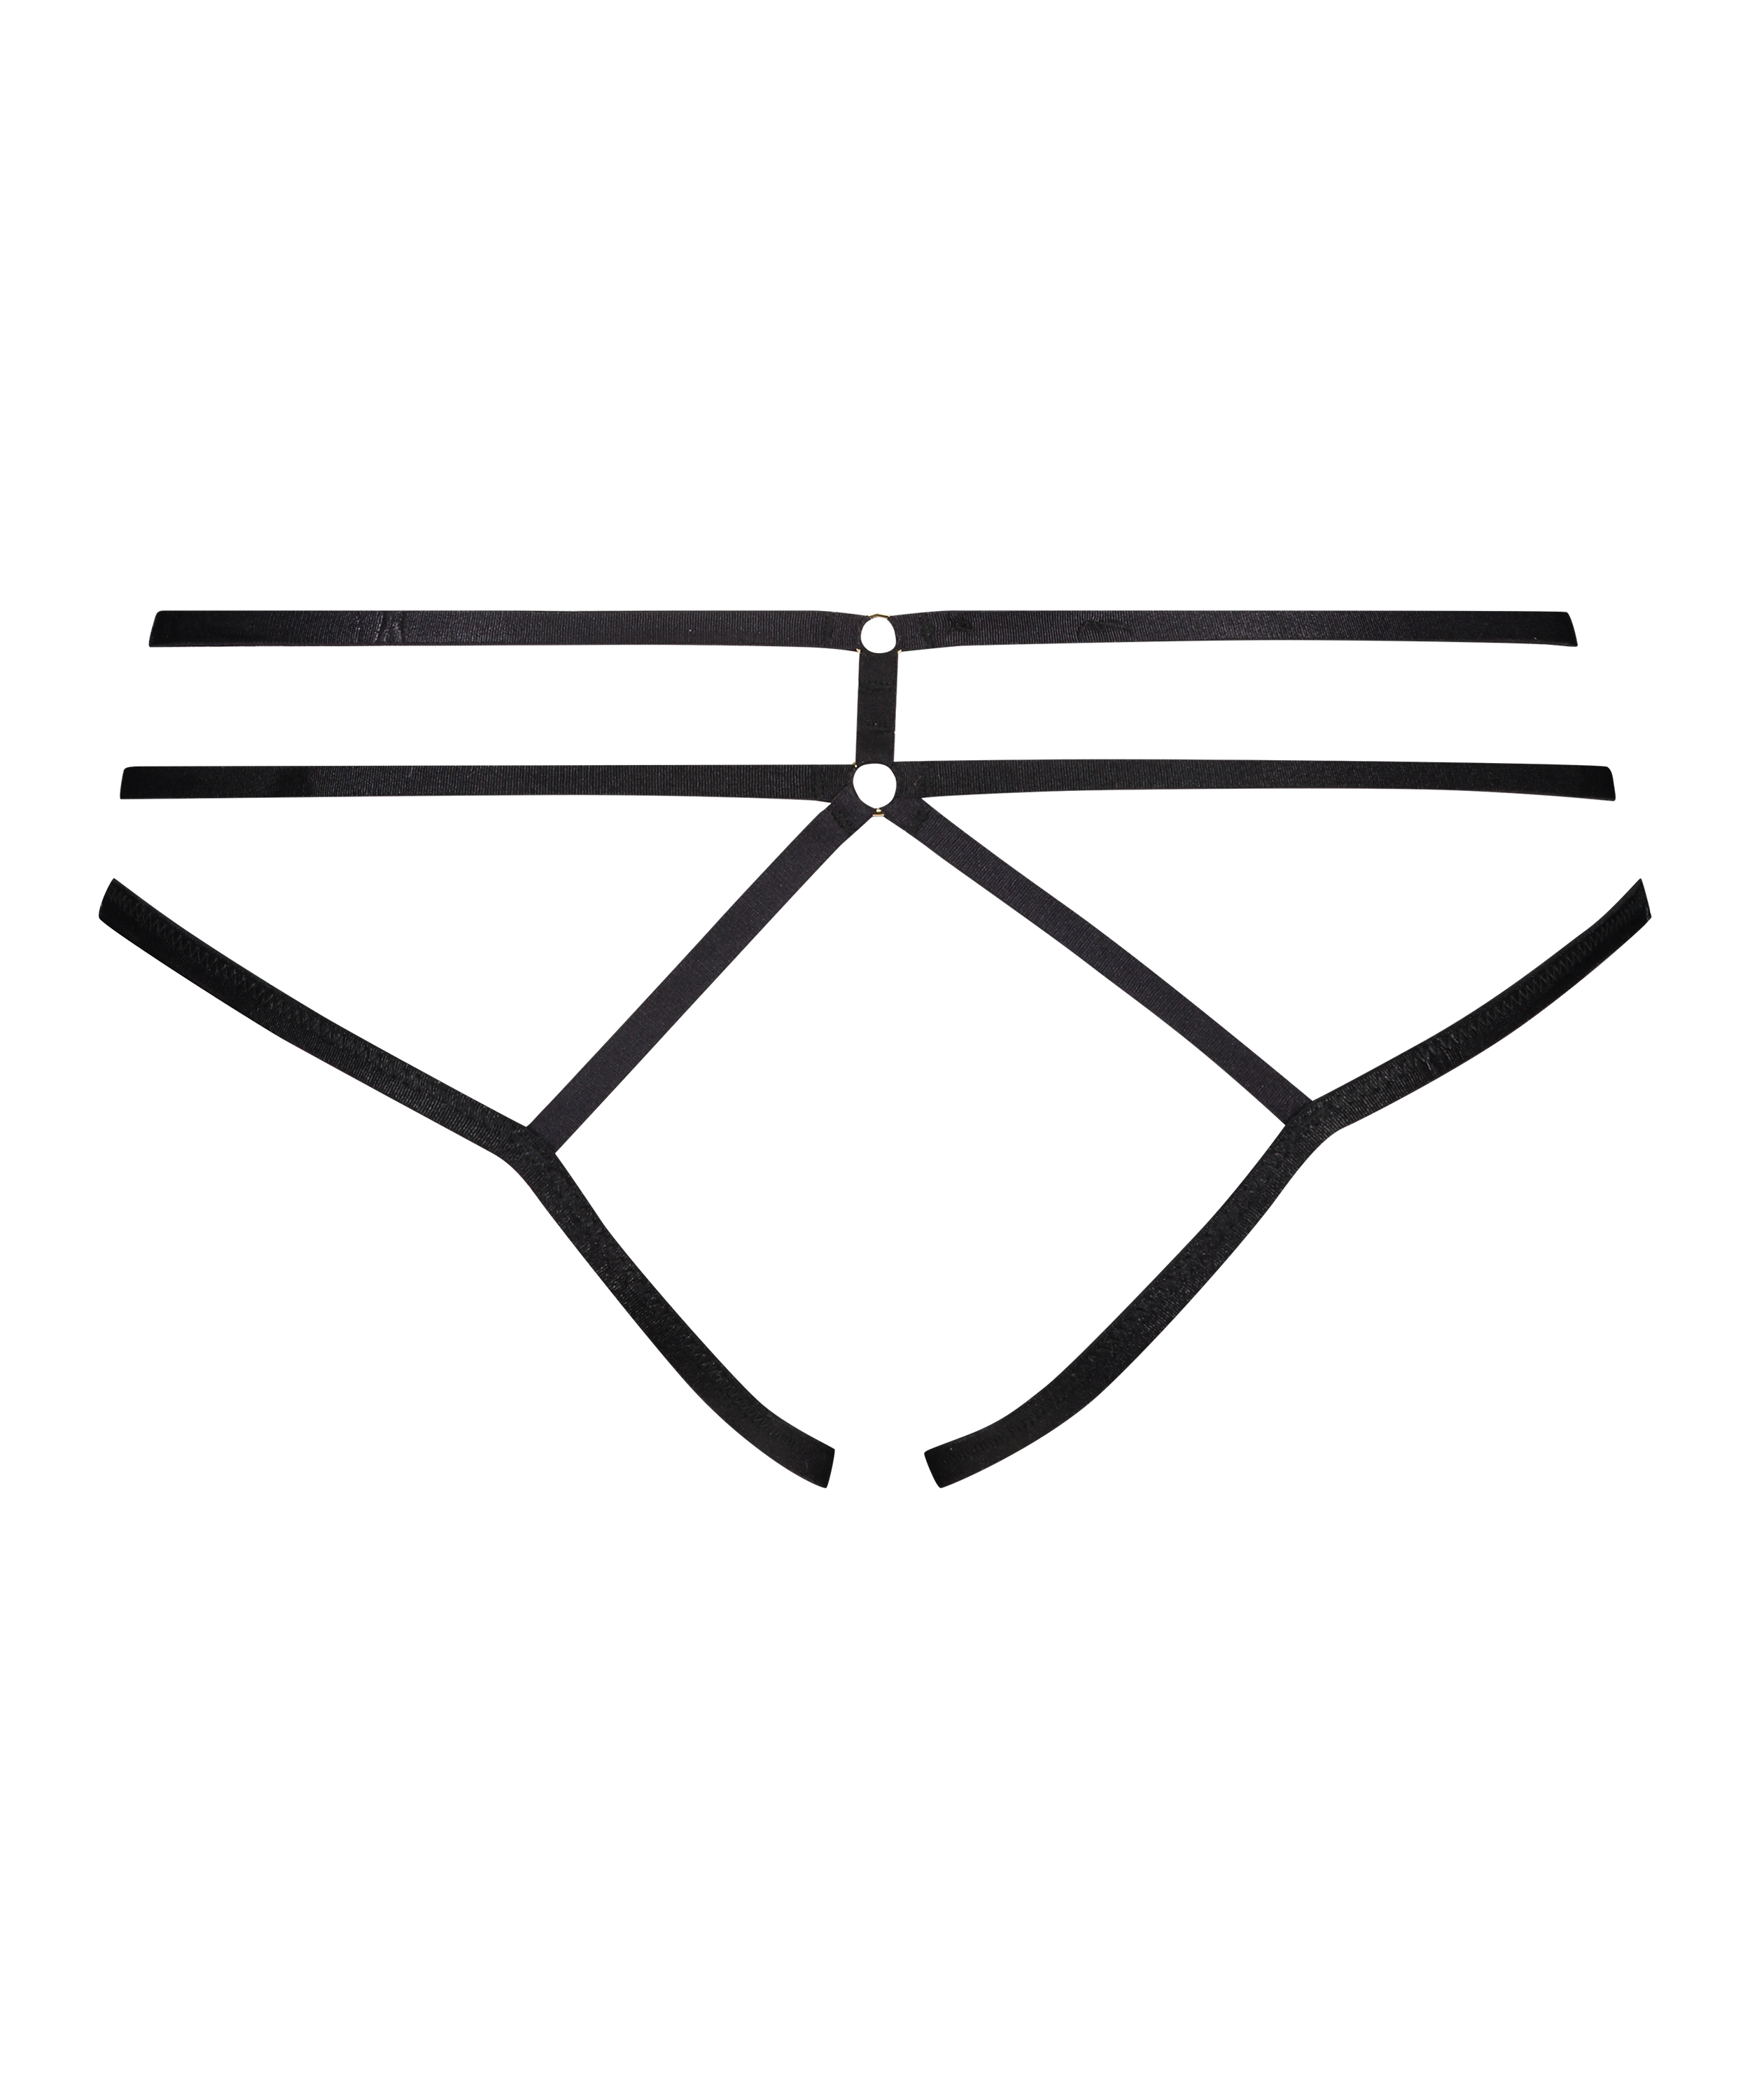 Effie open crotch knickers for €16.99 - Sexy Panties - Hunkemöller